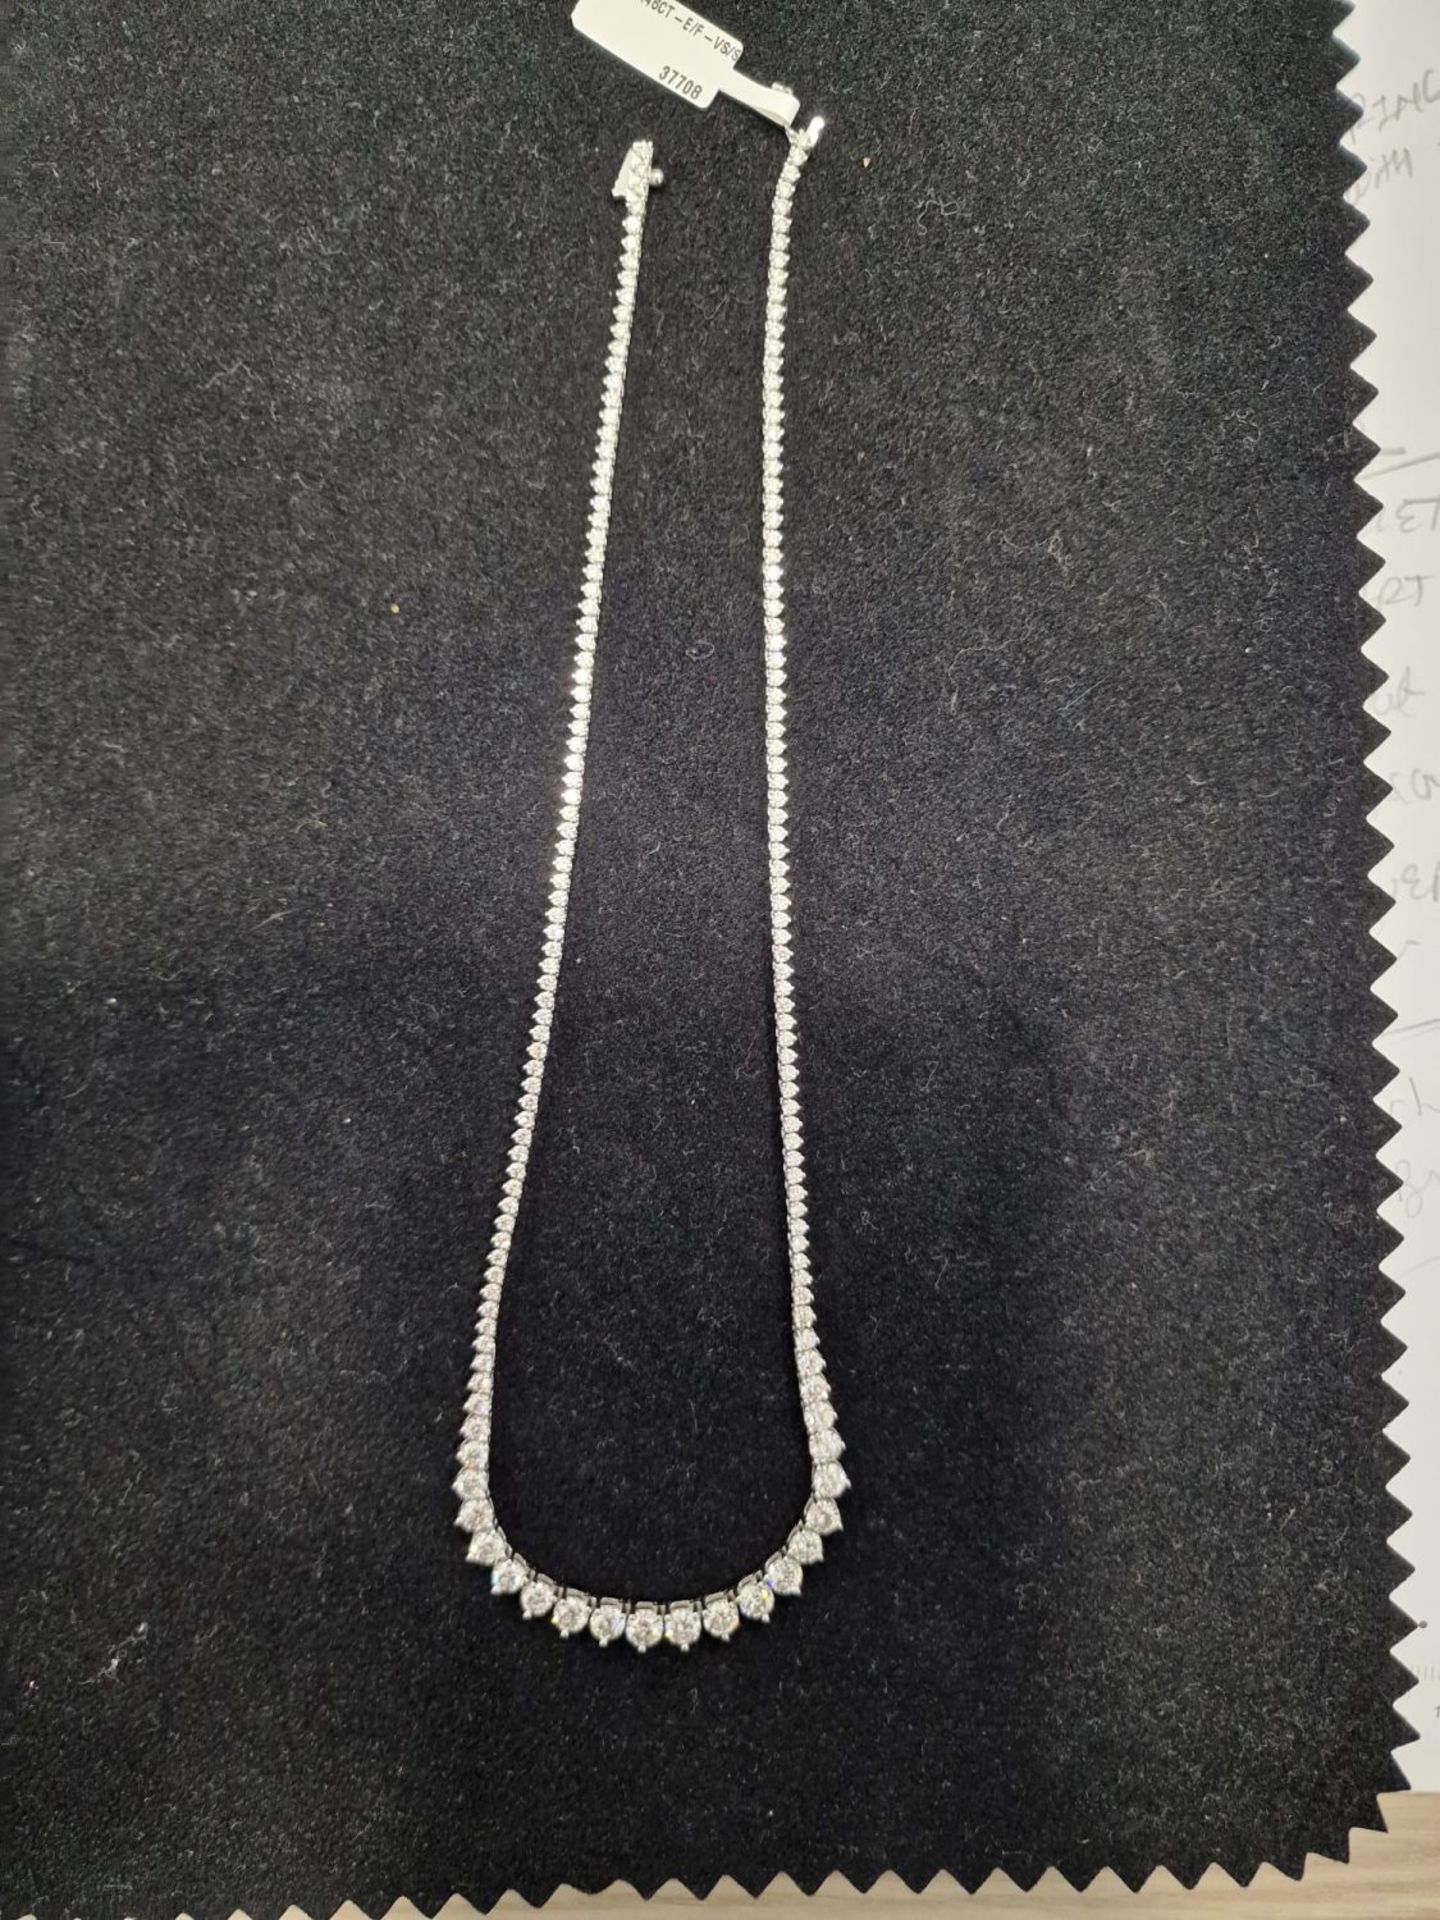 *** 11.46CT DIAMOND TENNIS NECKLACE *** set in 18CT WHITE GOLD (22.92g) - Image 2 of 2